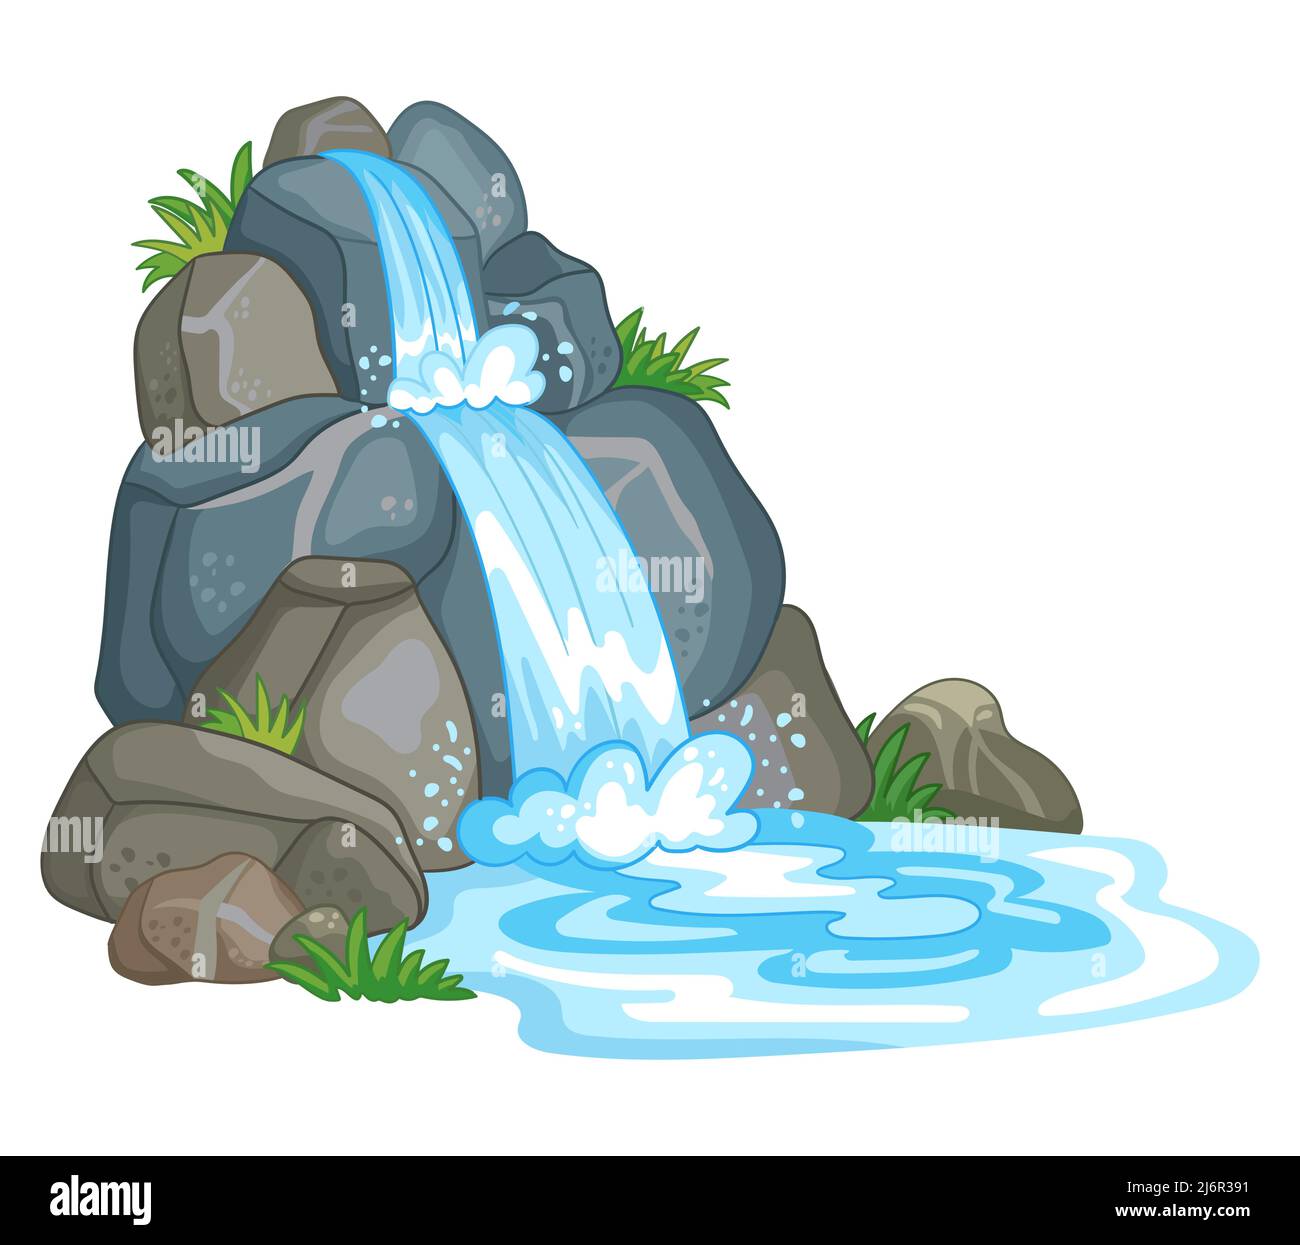 Waterfall among rocks. Cascade shimmers downward. Water flowing. Vector illustration in cute cartoon style isolated on white background. For print, de Stock Vector